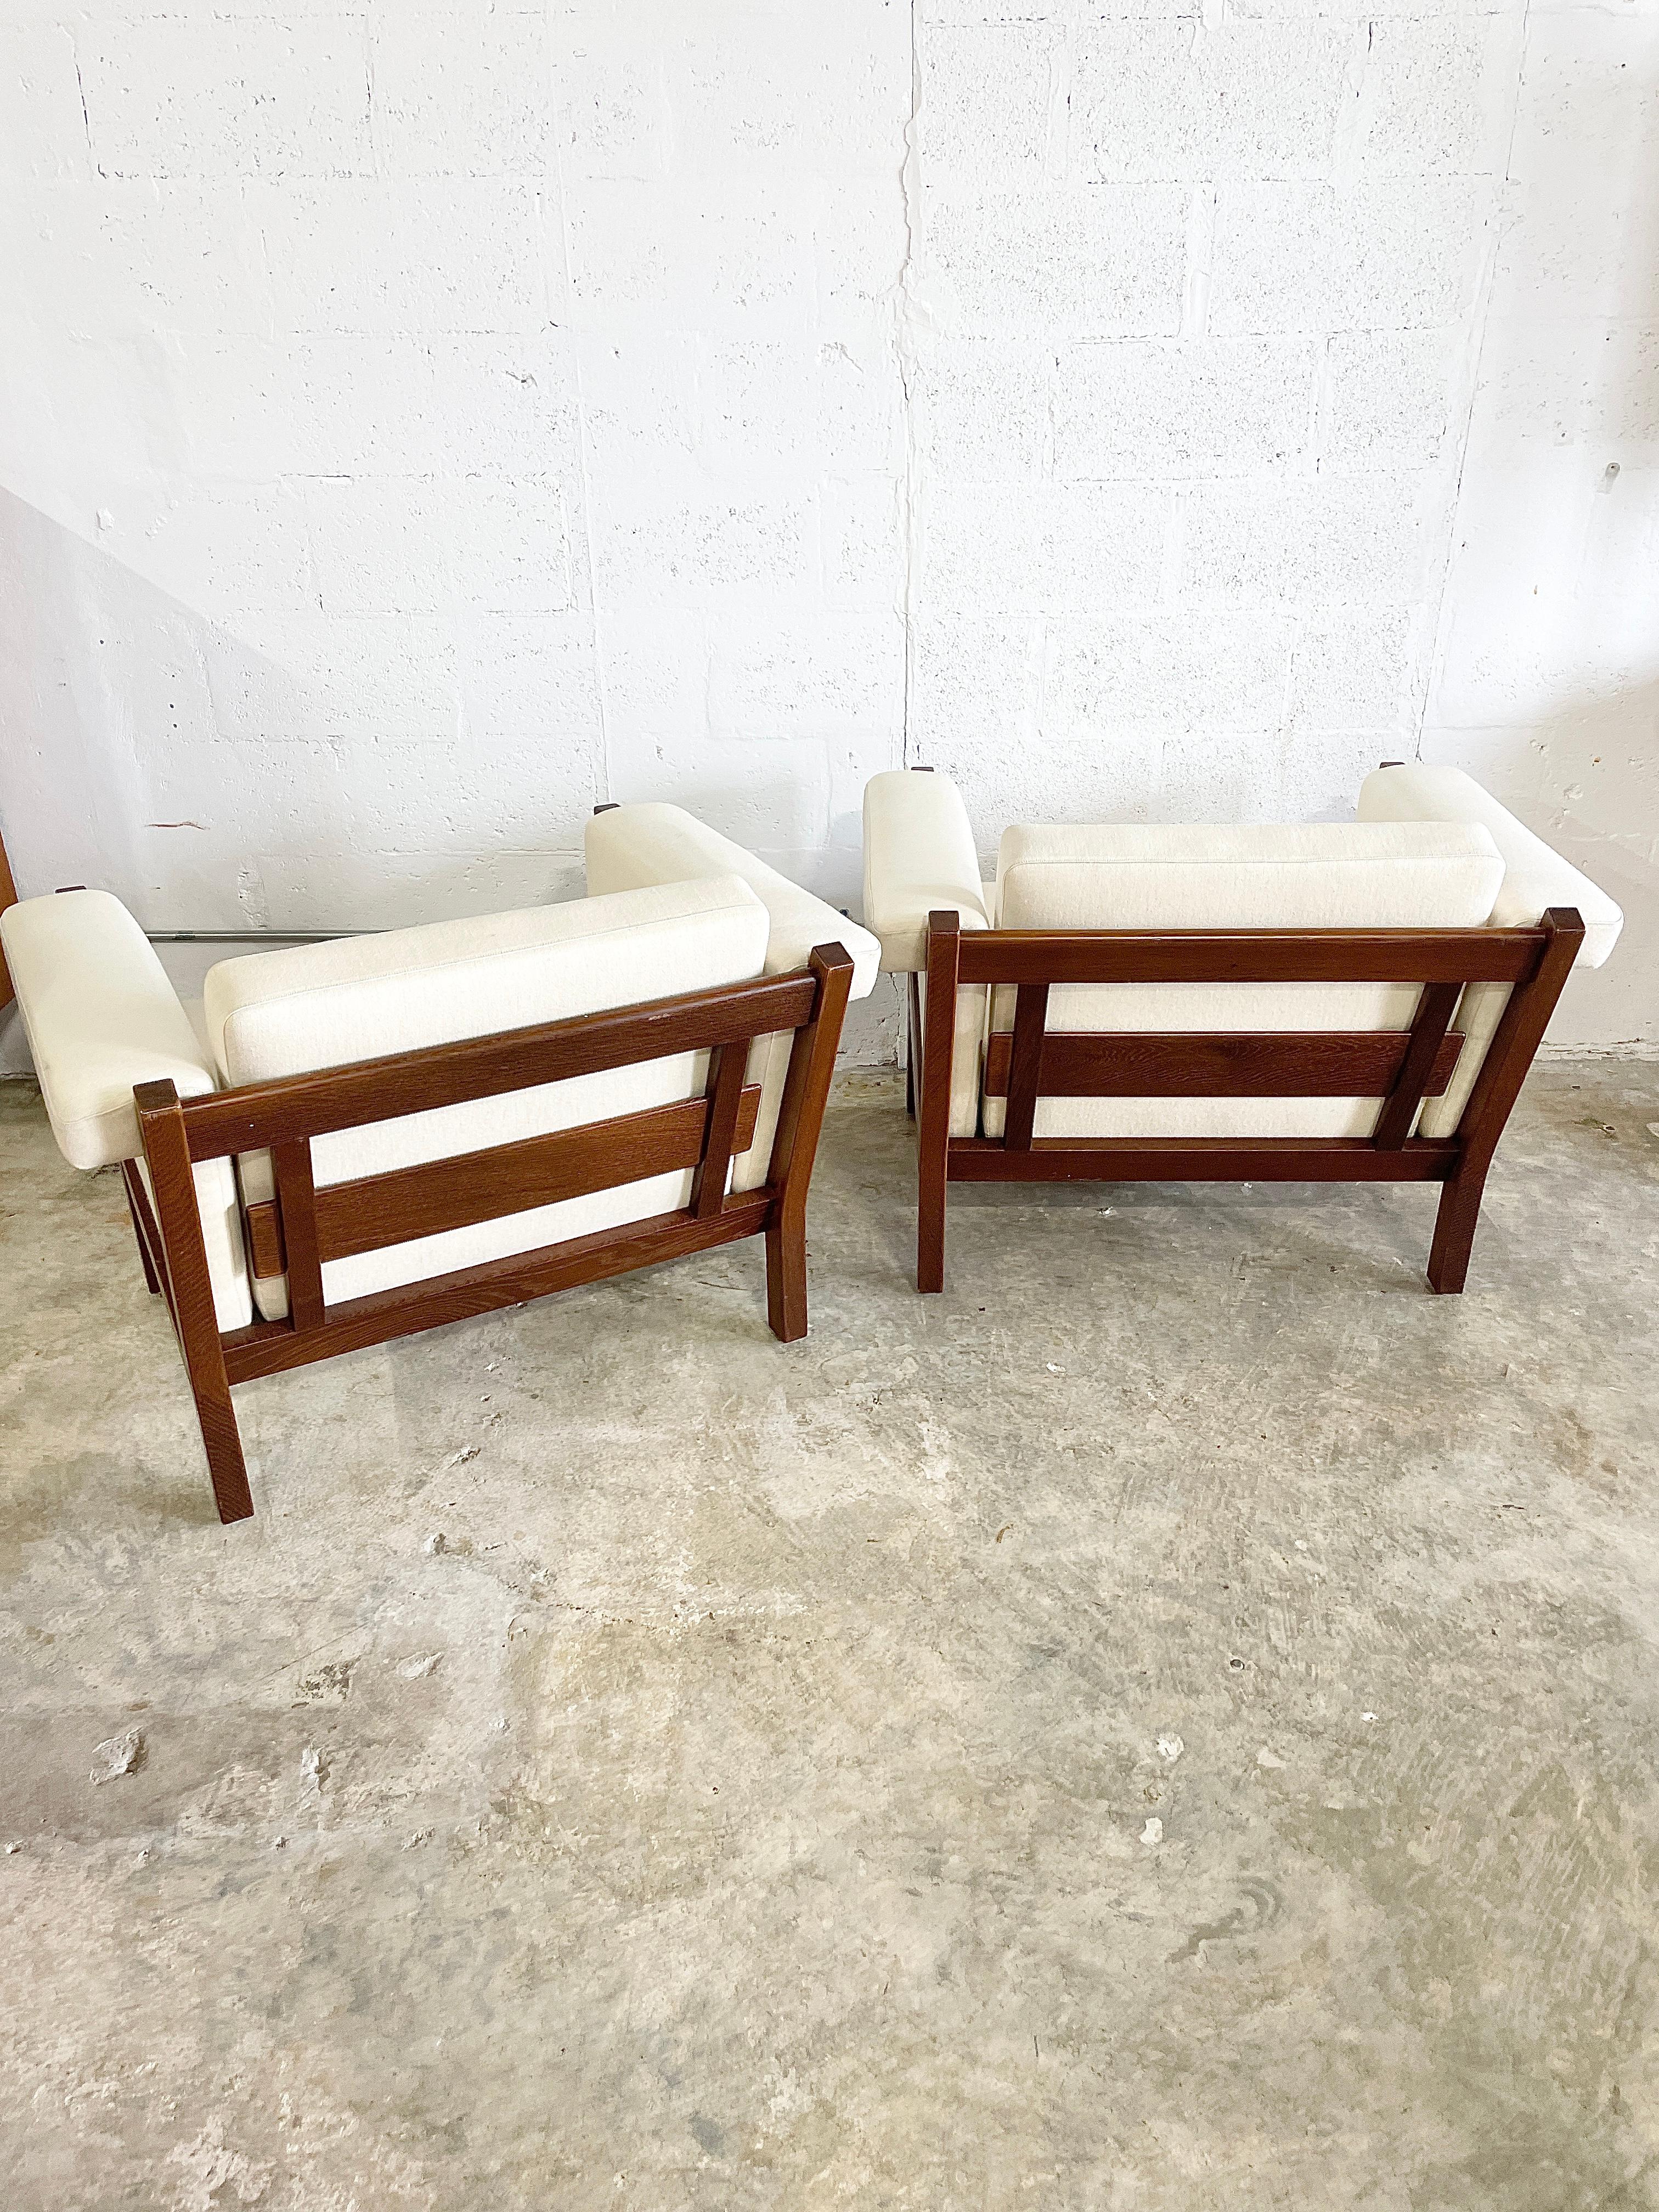 Stained oak-framed Pair of Lounge Chairs designed by Hans J. Wegner for Getama (Denmark). Features light wool upholstery and sprung cushions. Price for pair. 36w 30d 29h 18seat